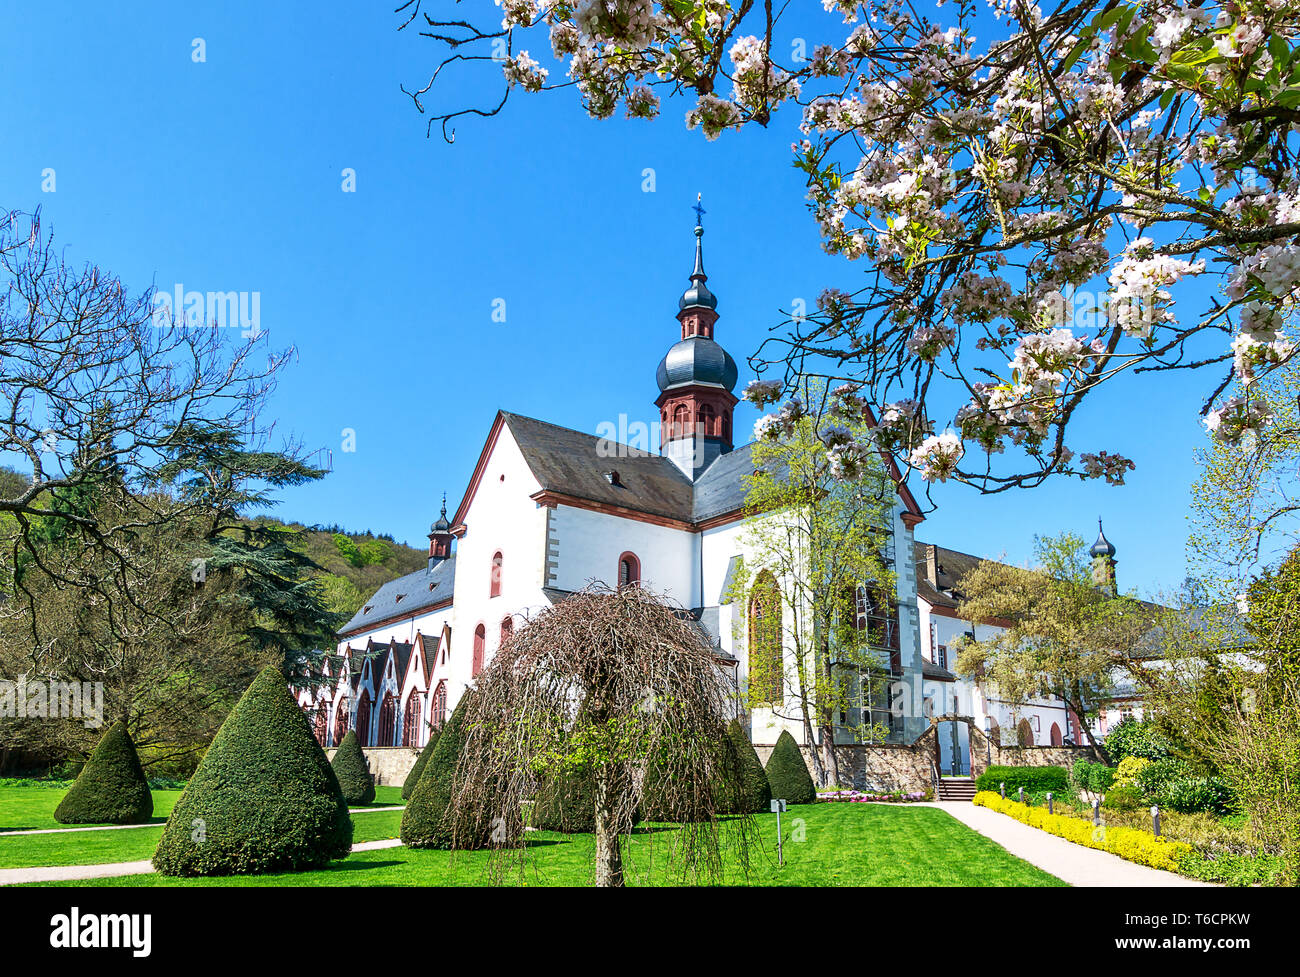 Eberbach Abbey, Mystic heritage of the Cistercian monks in Rheingau, filming location for the movie The Name of the Rose, Hesse, Germany Stock Photo